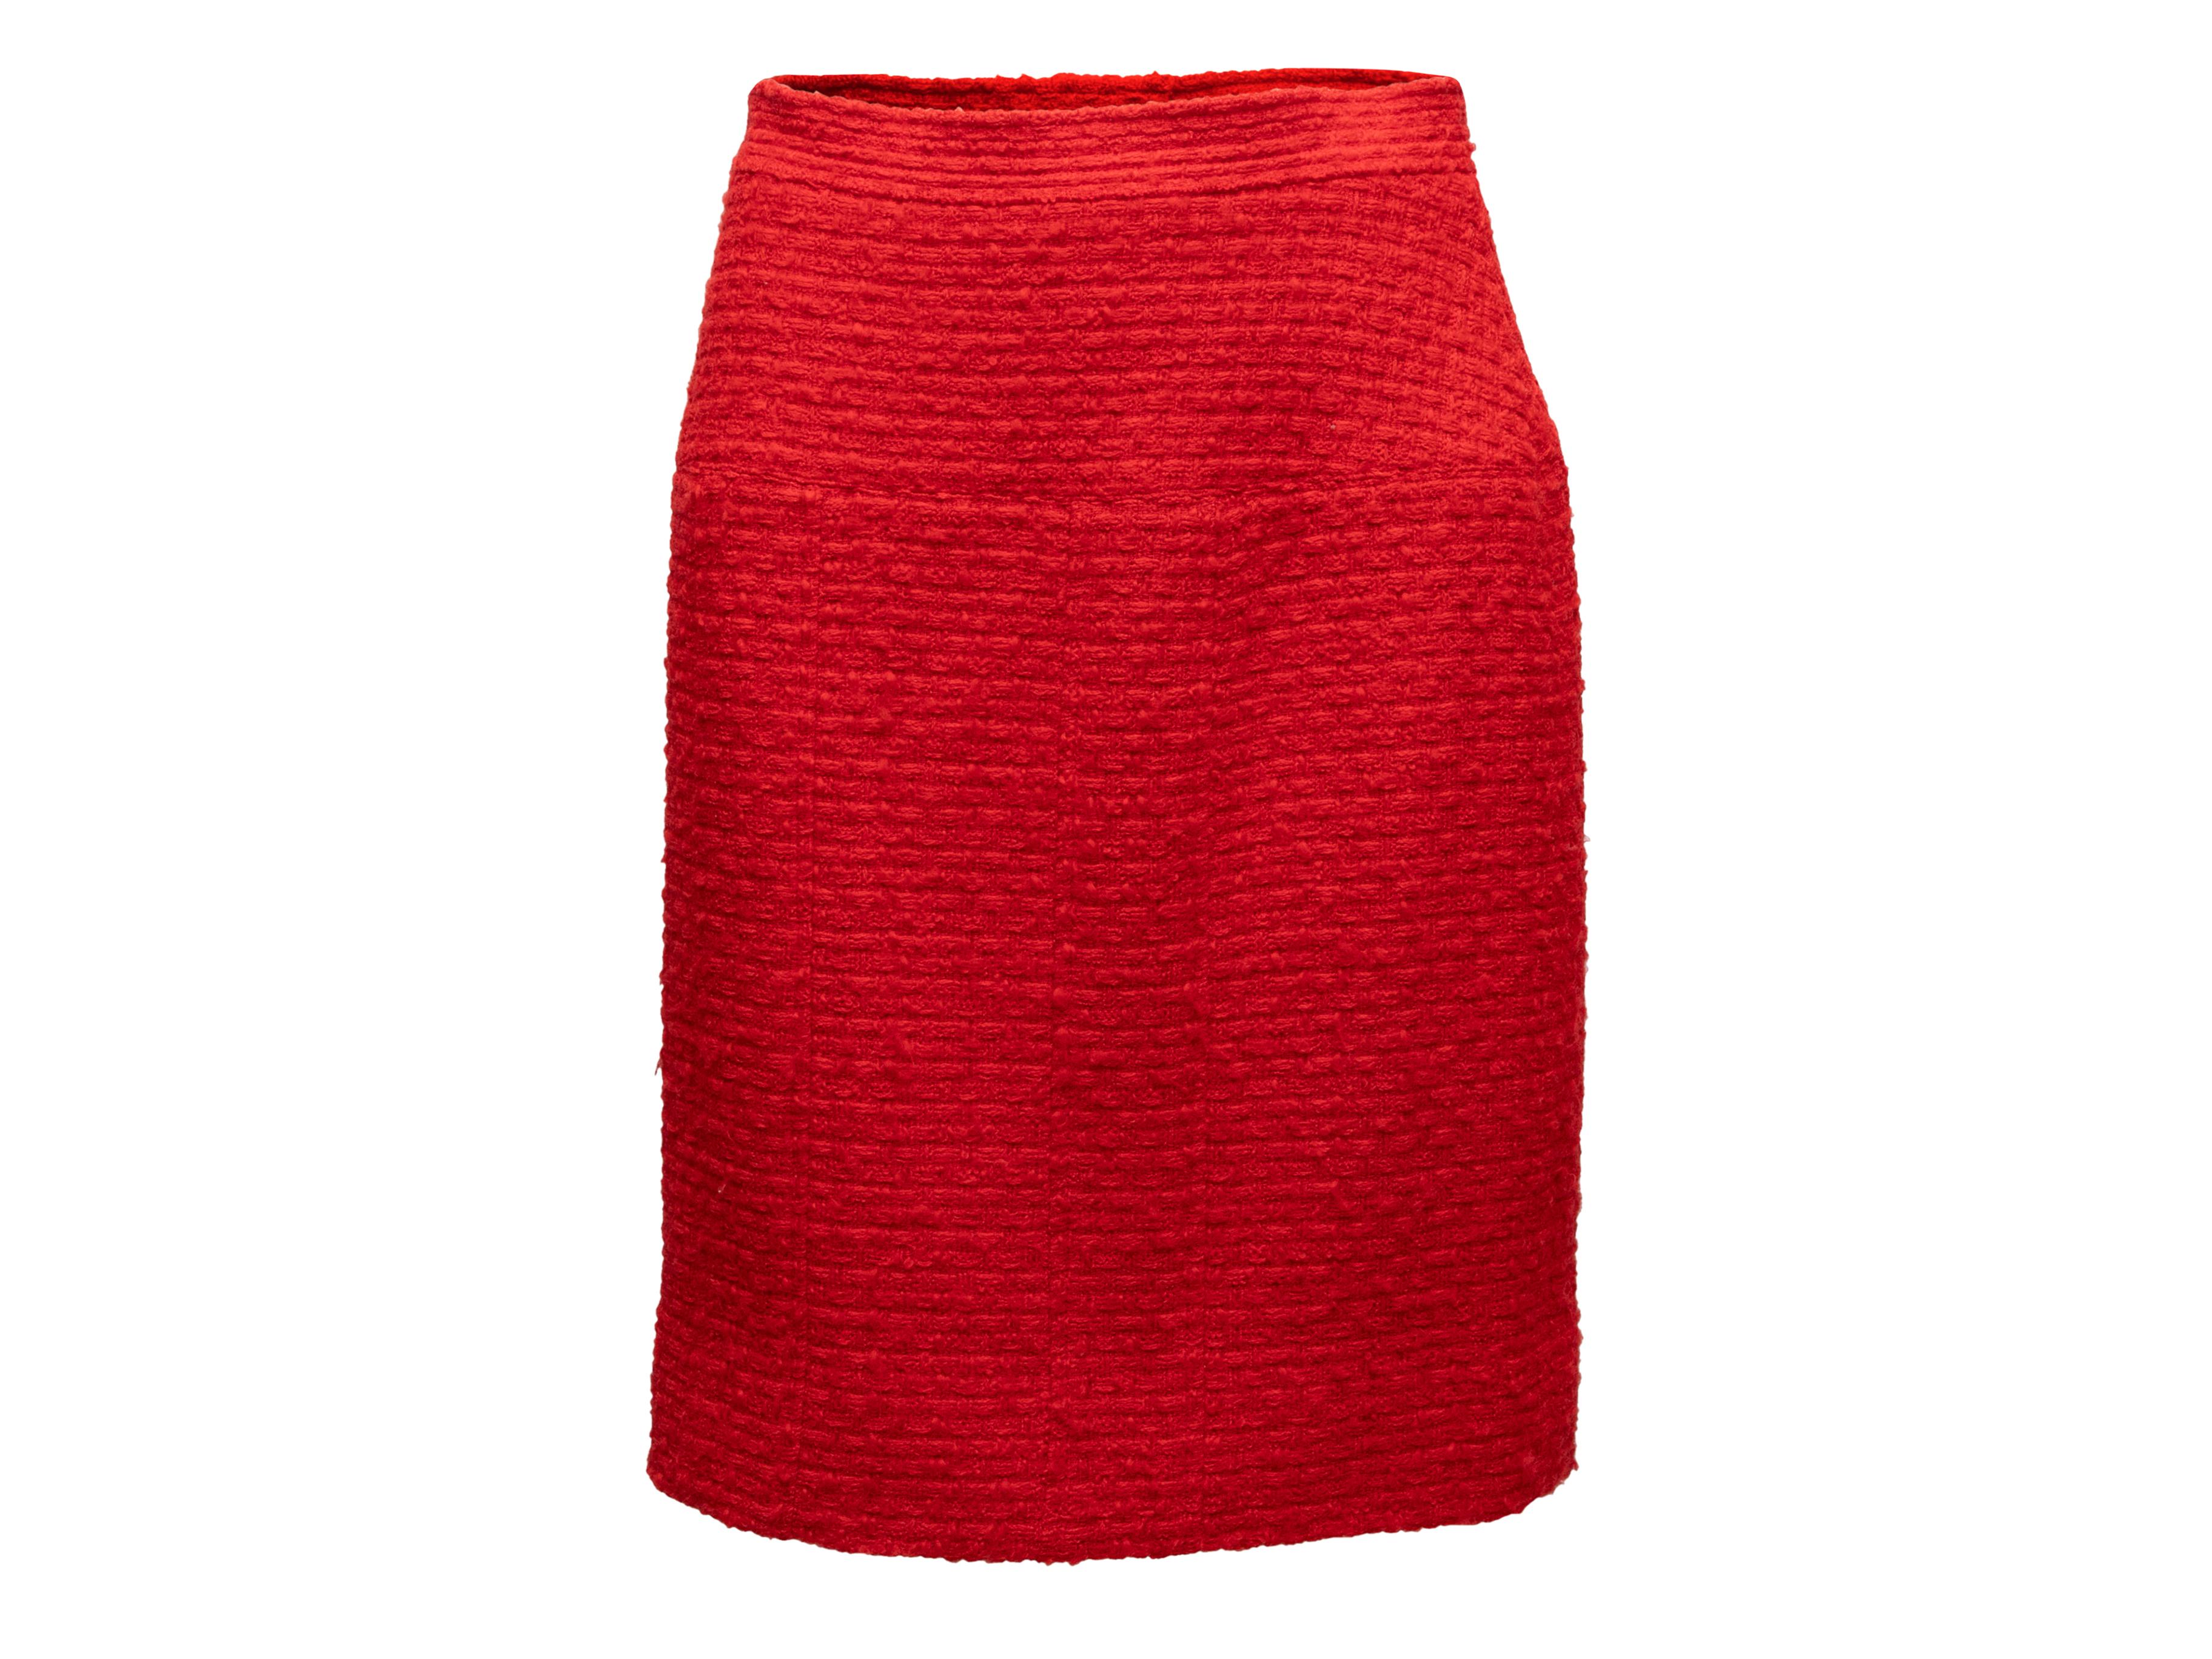 Vintage Red Chanel Boutique Tweed Pencil Skirt Size S For Sale 1